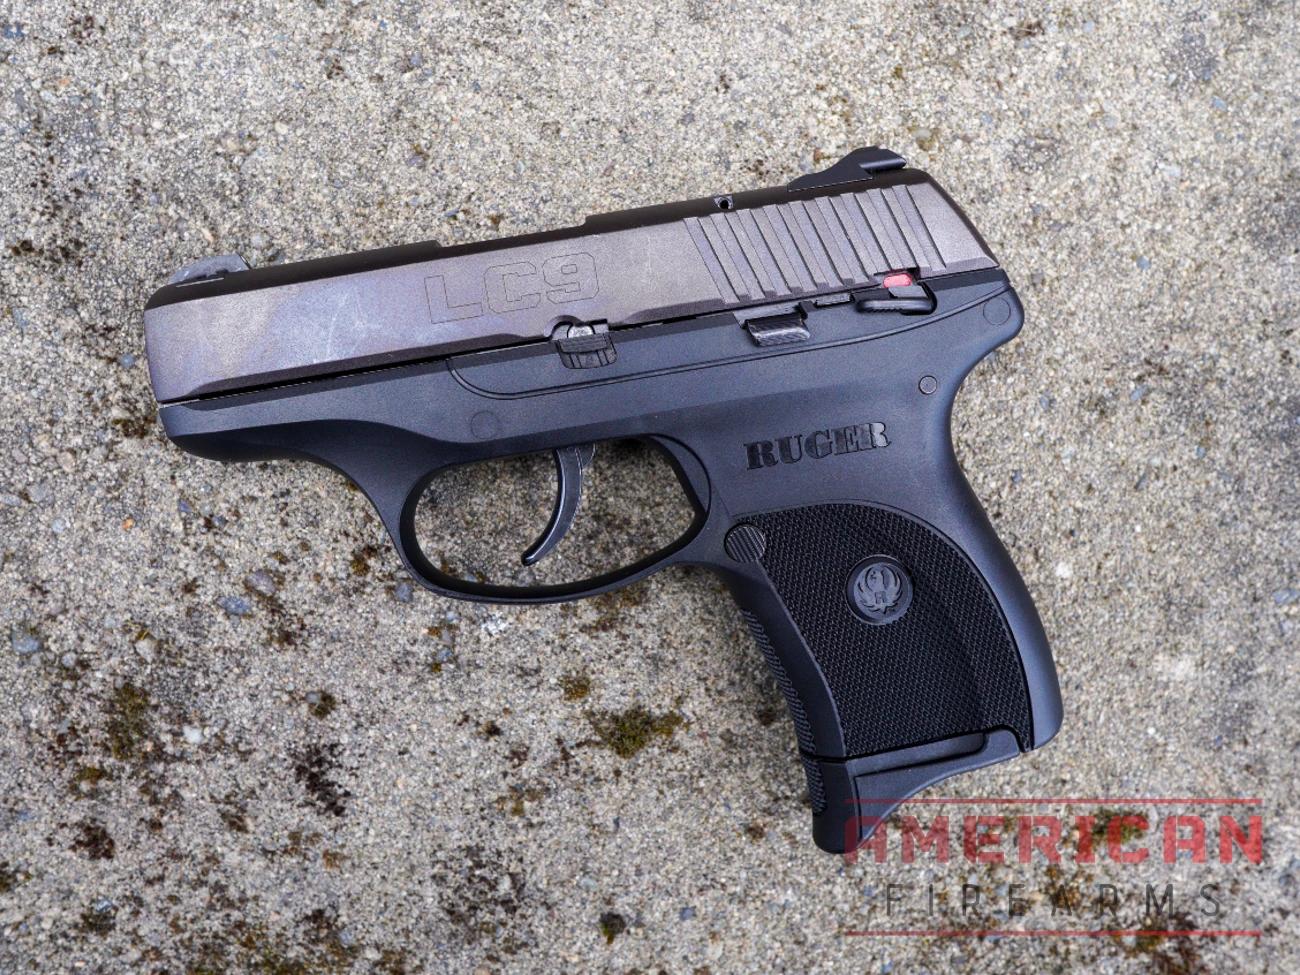 While not a micro 9 per se, the Ruger's LC9 has a teeny-tiny grip -- not unlike a number of micro 9s.